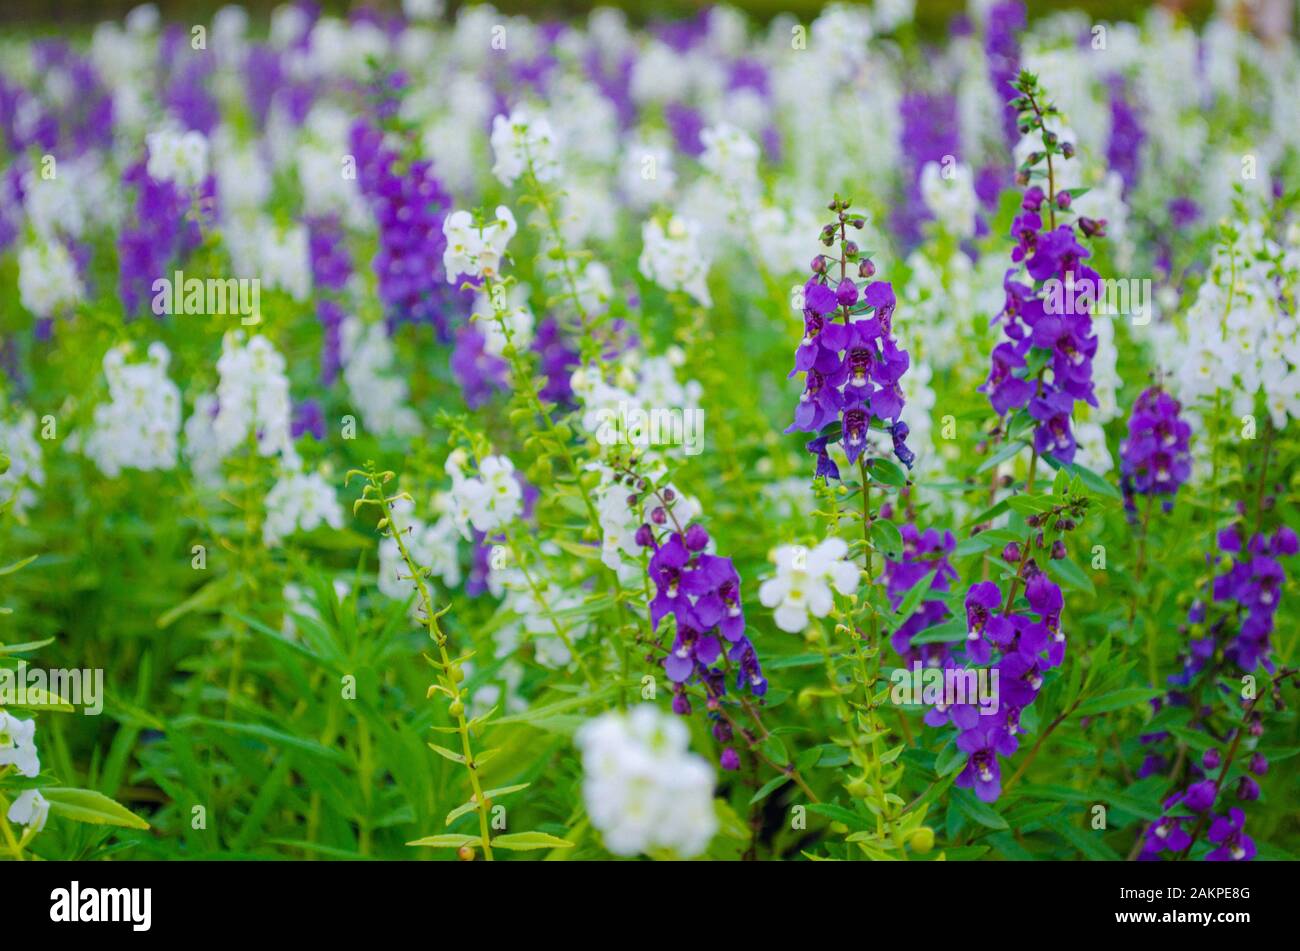 garden of white and violet Salvia flower Stock Photo